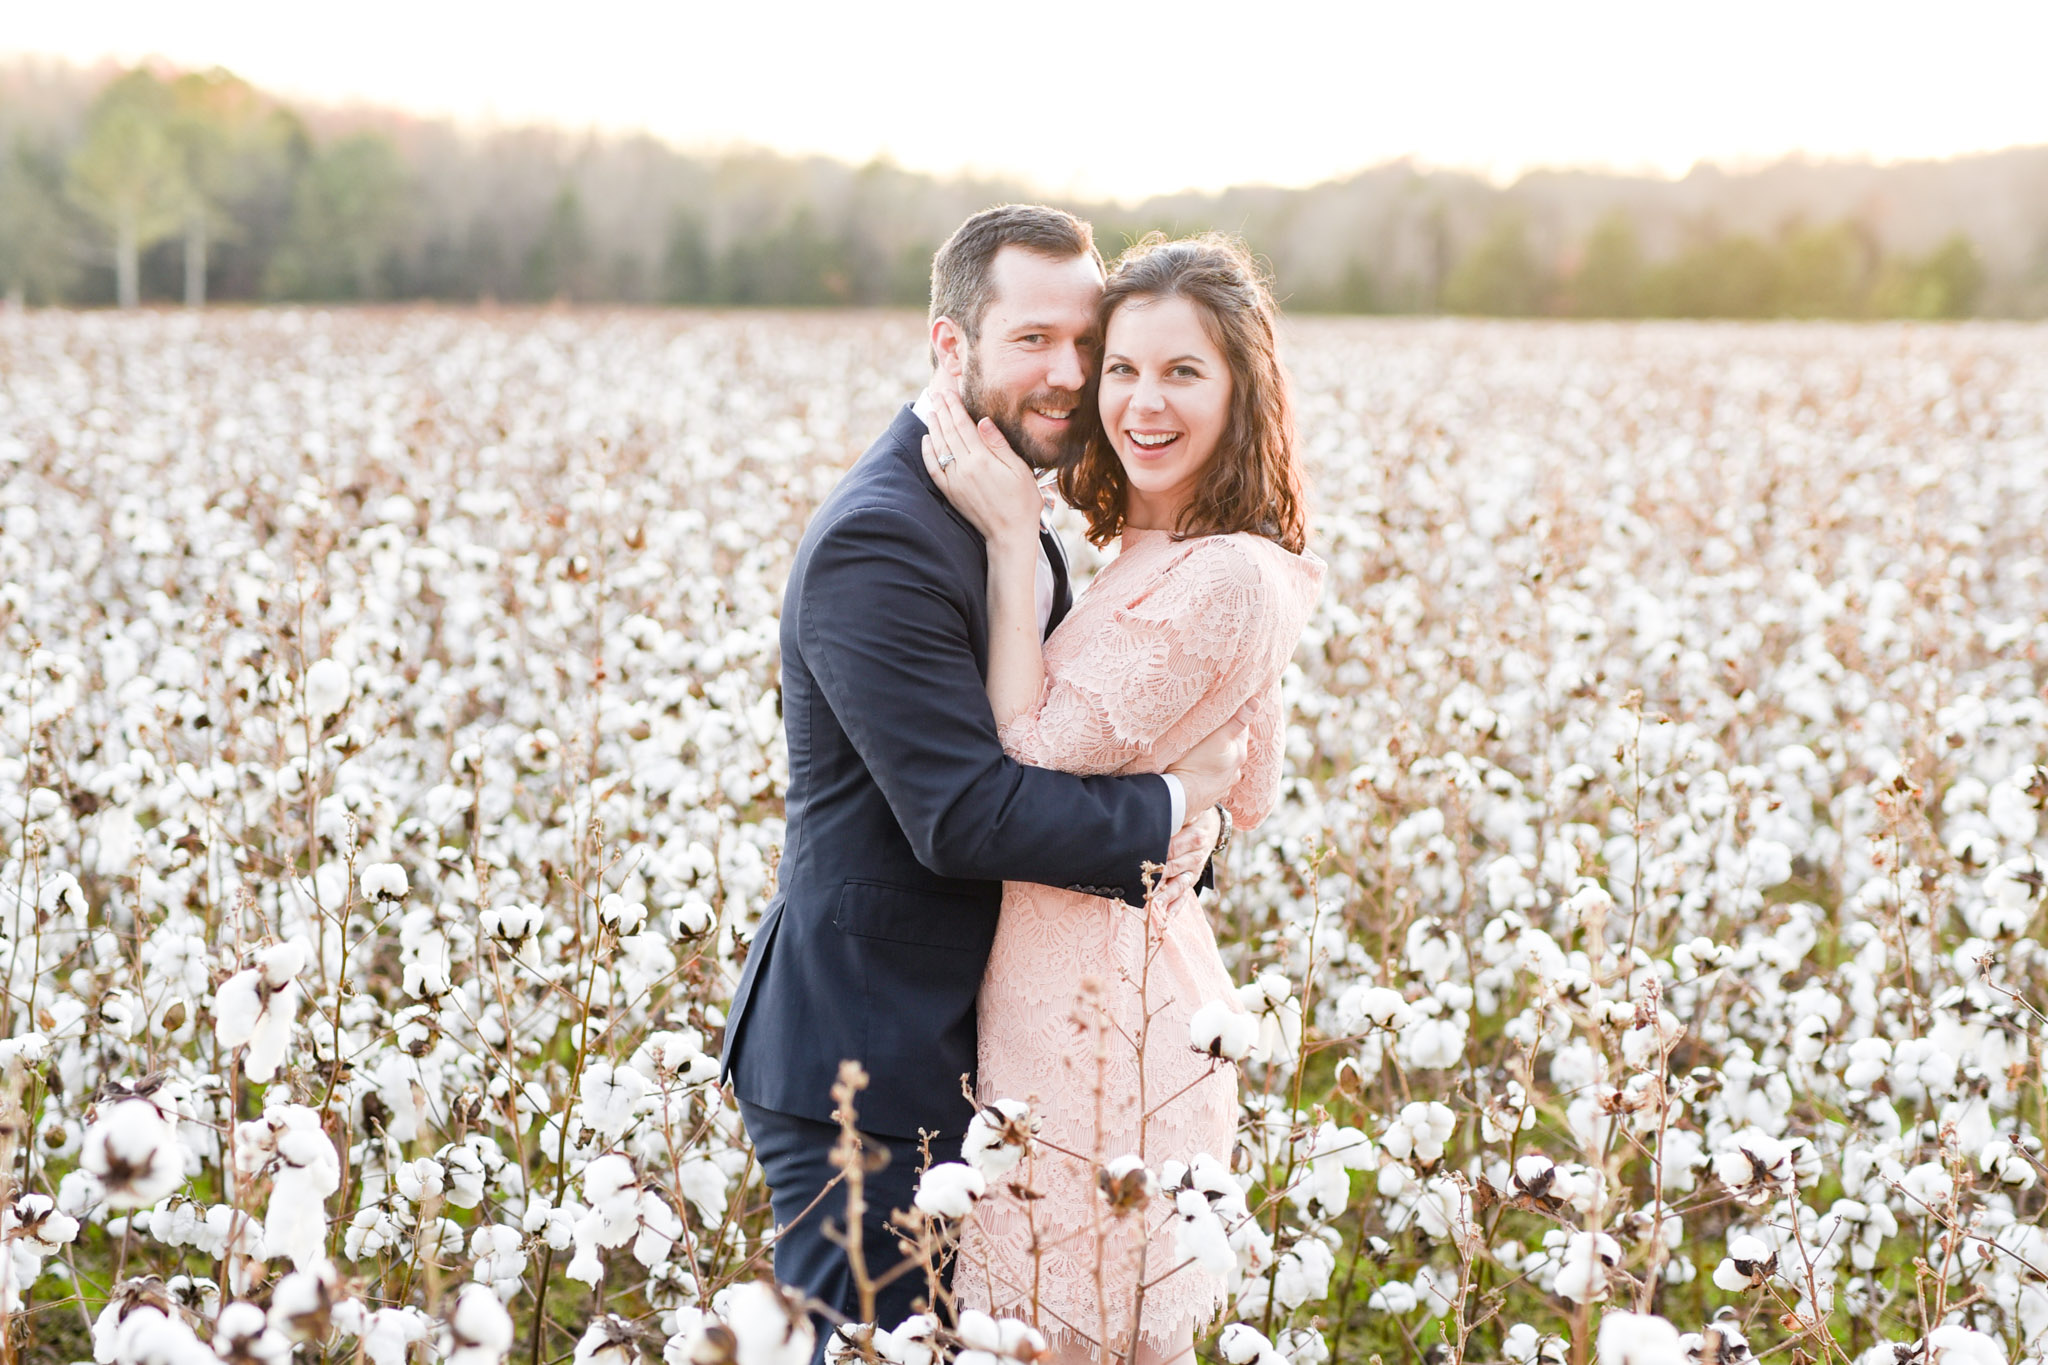 Couples stands in cotton field at sunset.